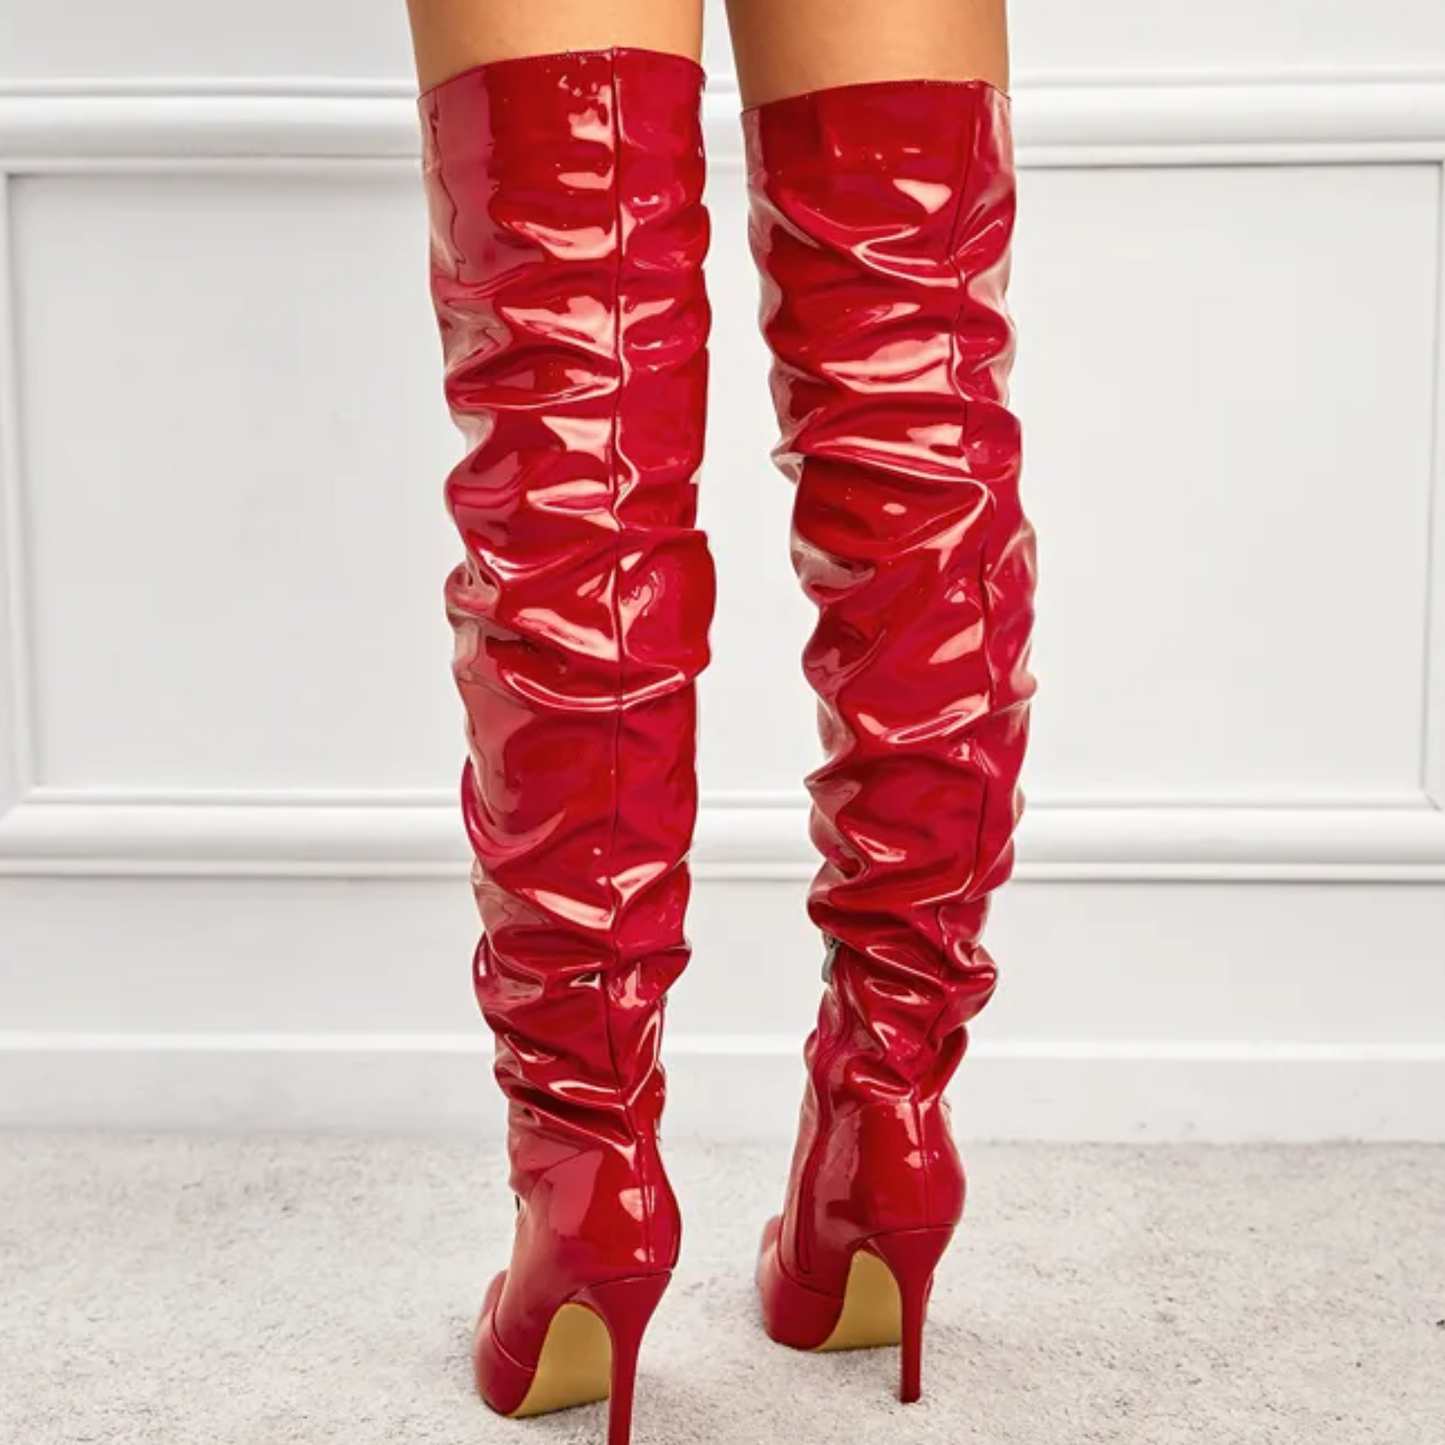 Red Patent Leather Over The Knee Boots